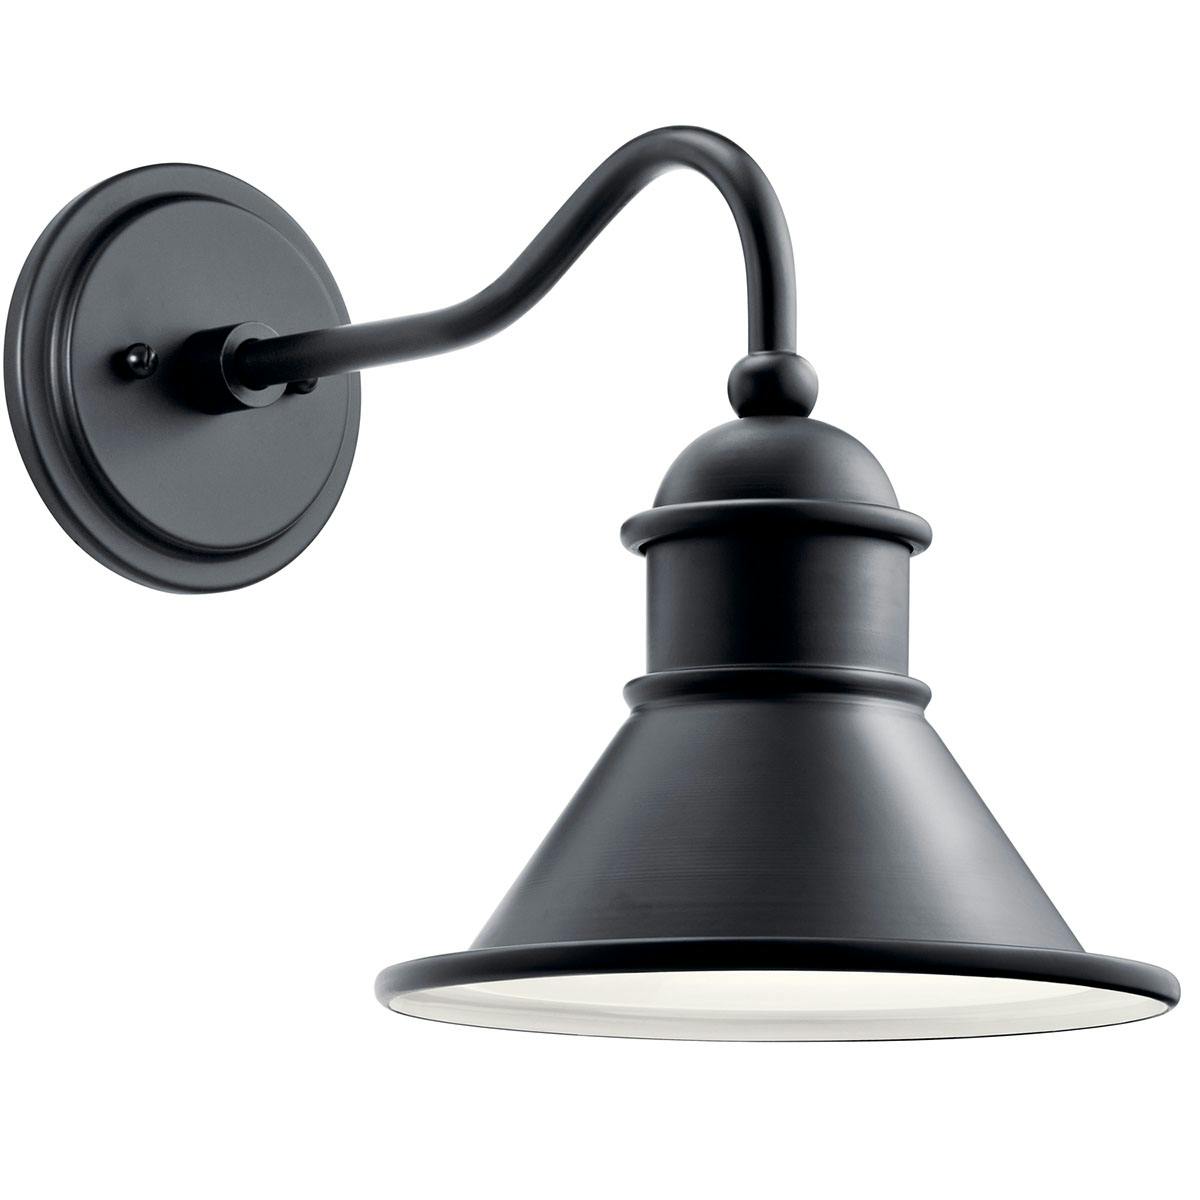 Northland 12" 1 Light Wall Light Black on a white background